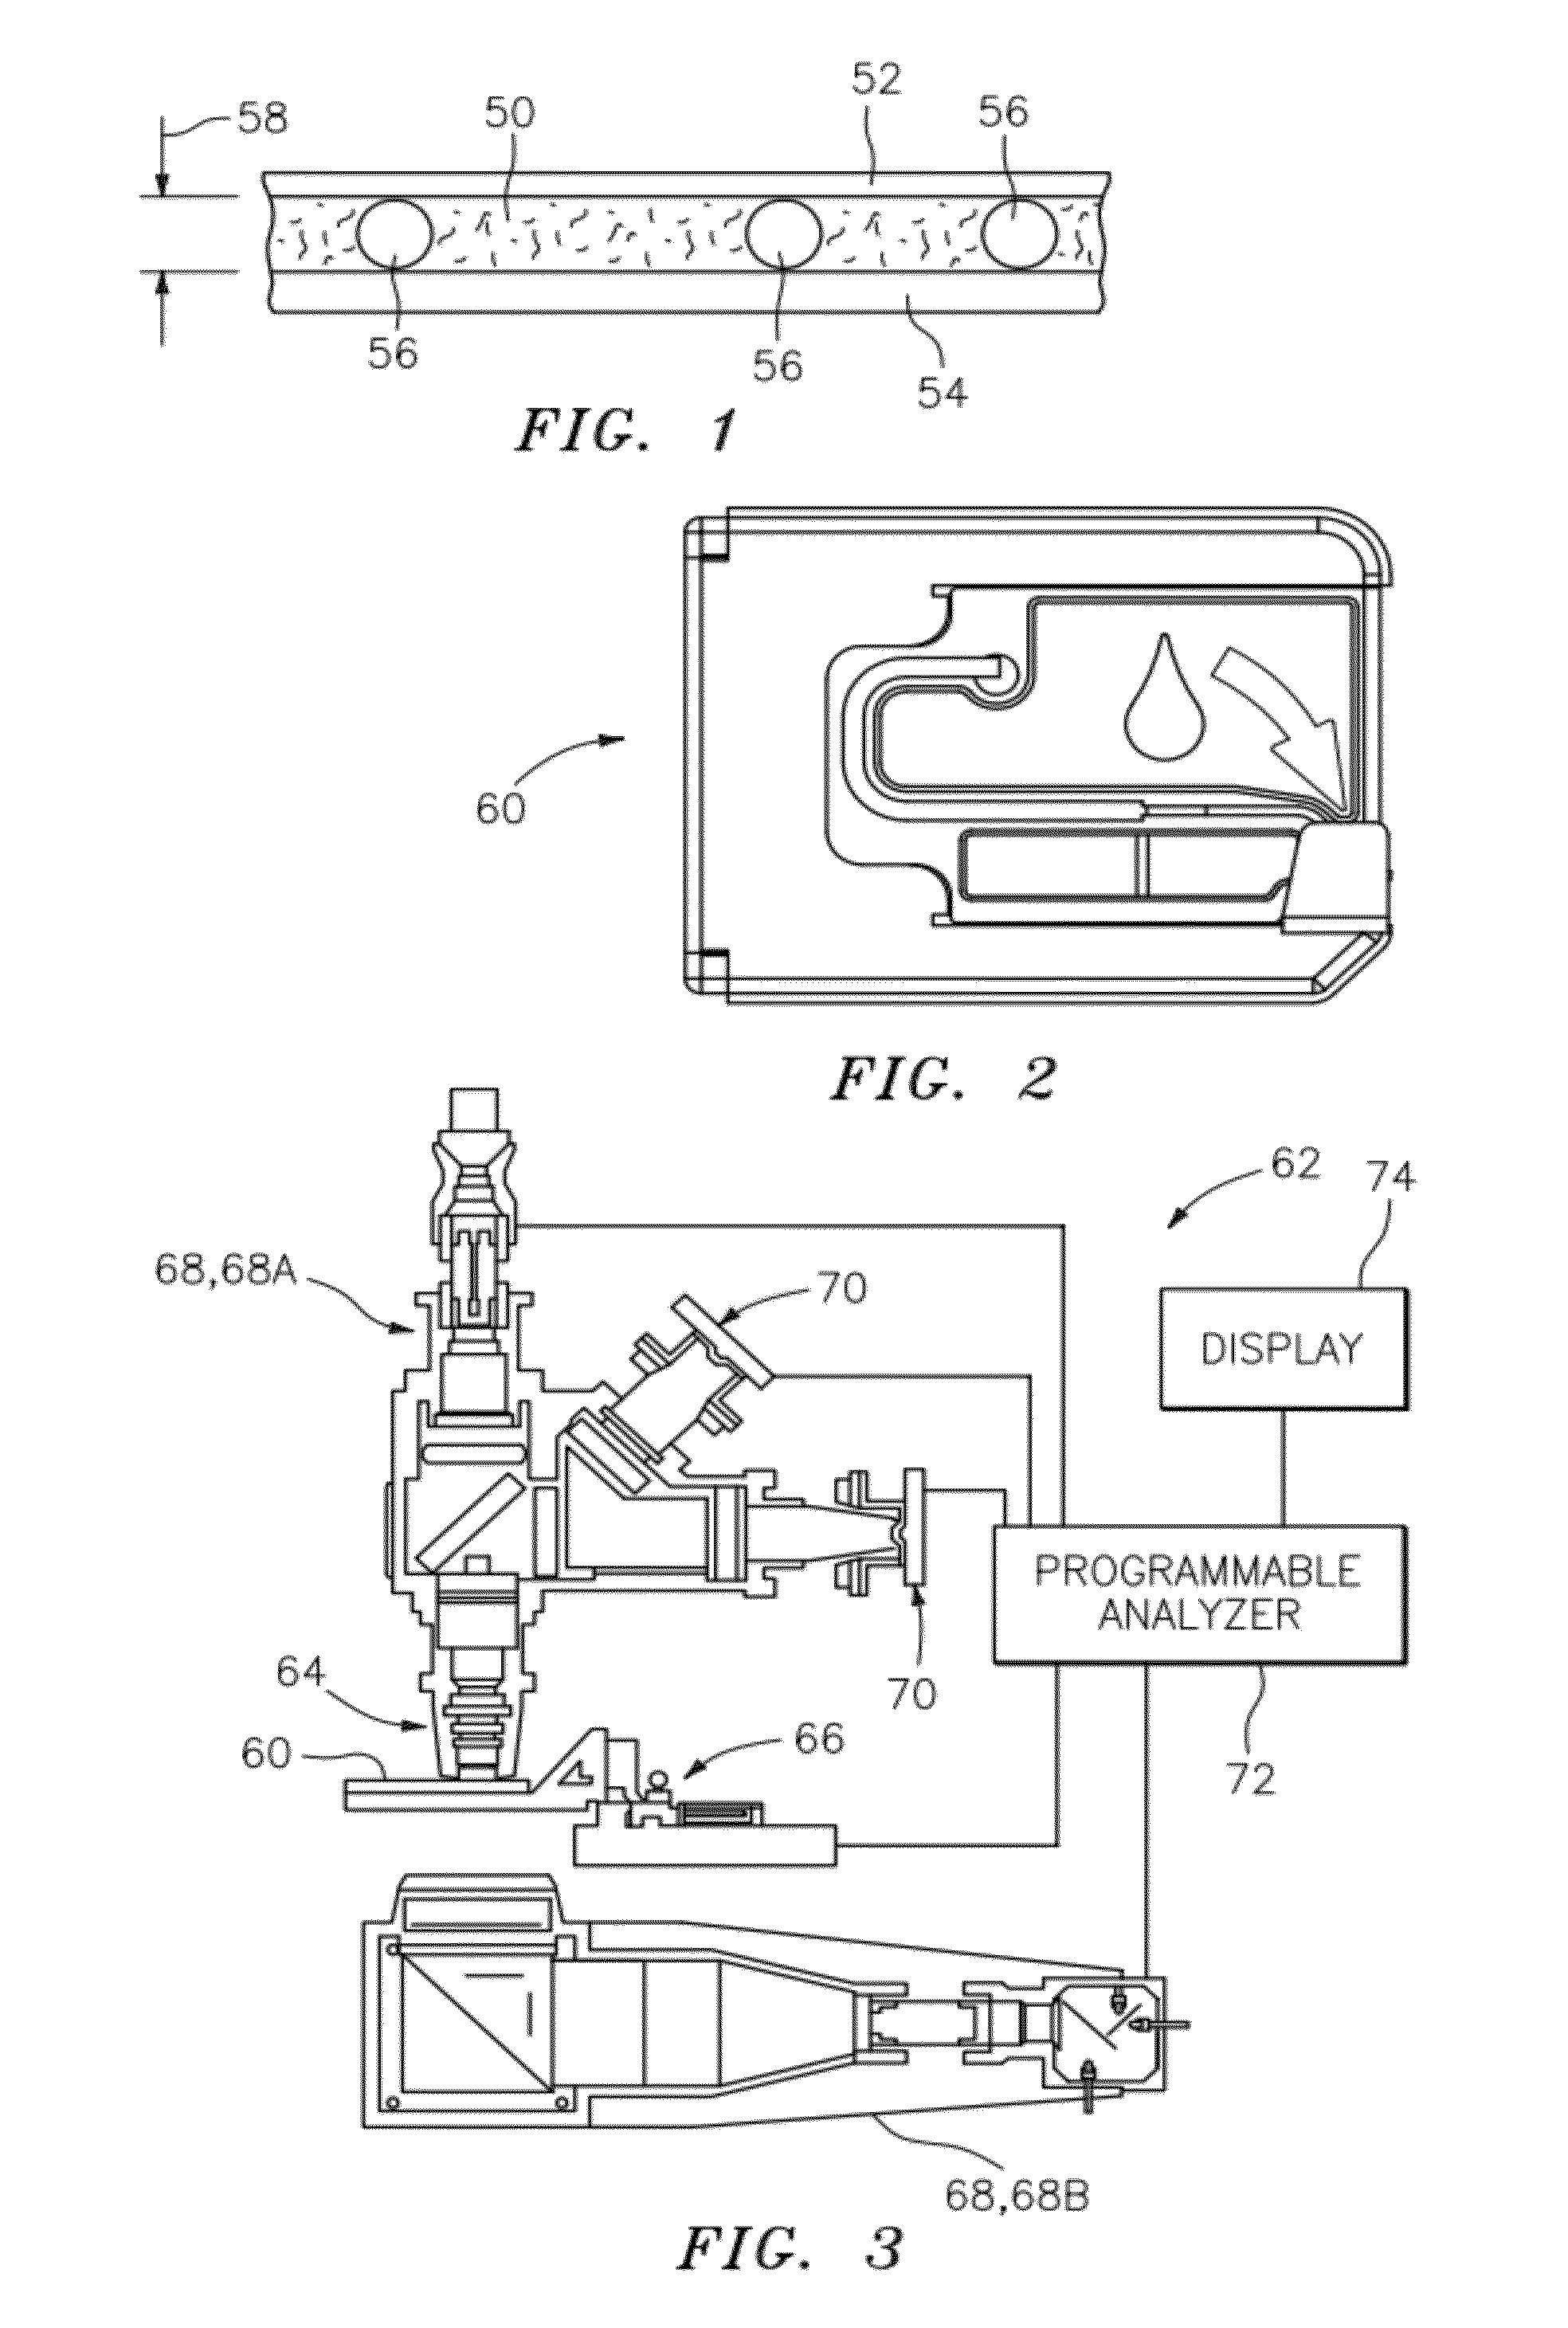 Method and apparatus for compressing imaging data of whole blood sample analyses